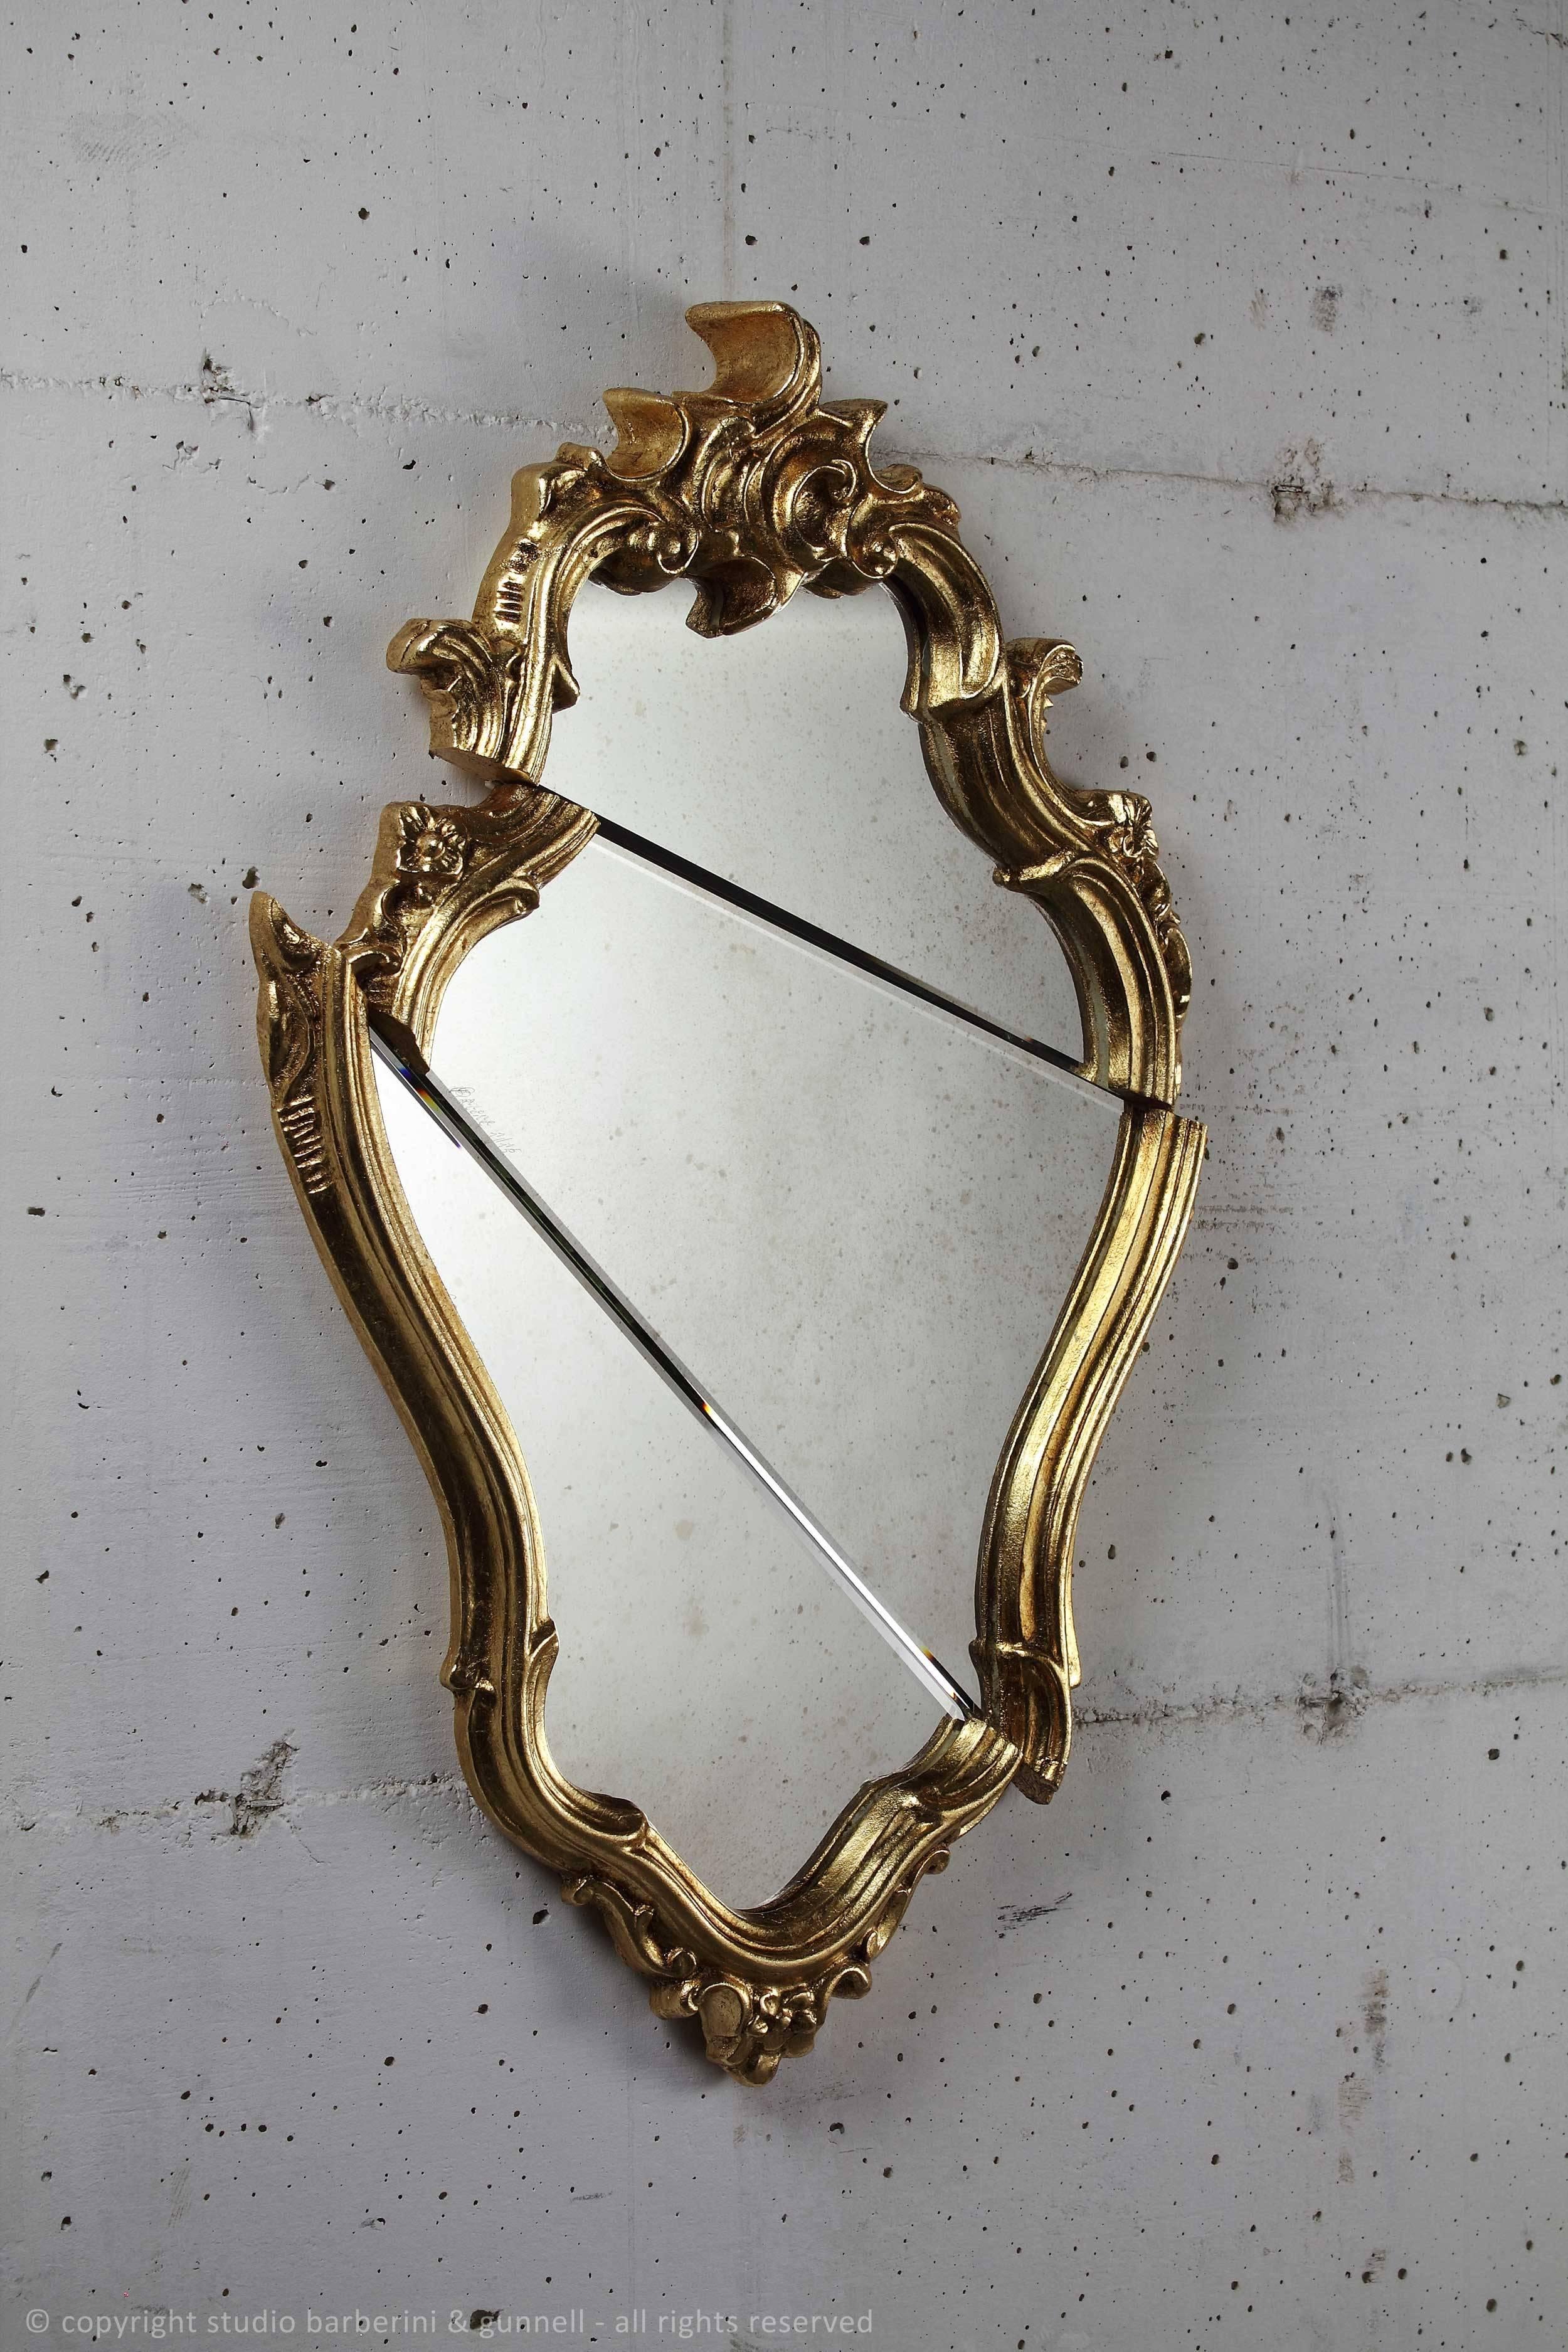 Rococut 'Barone'. Series of mirrors called 'Rococut' made up of four different mirrors. Each mirror has its own aristocratic name.The Rococut mirror has frame in gold-plated wood and an antiquate mirror (origin of glass: Scotland/Great Britain).